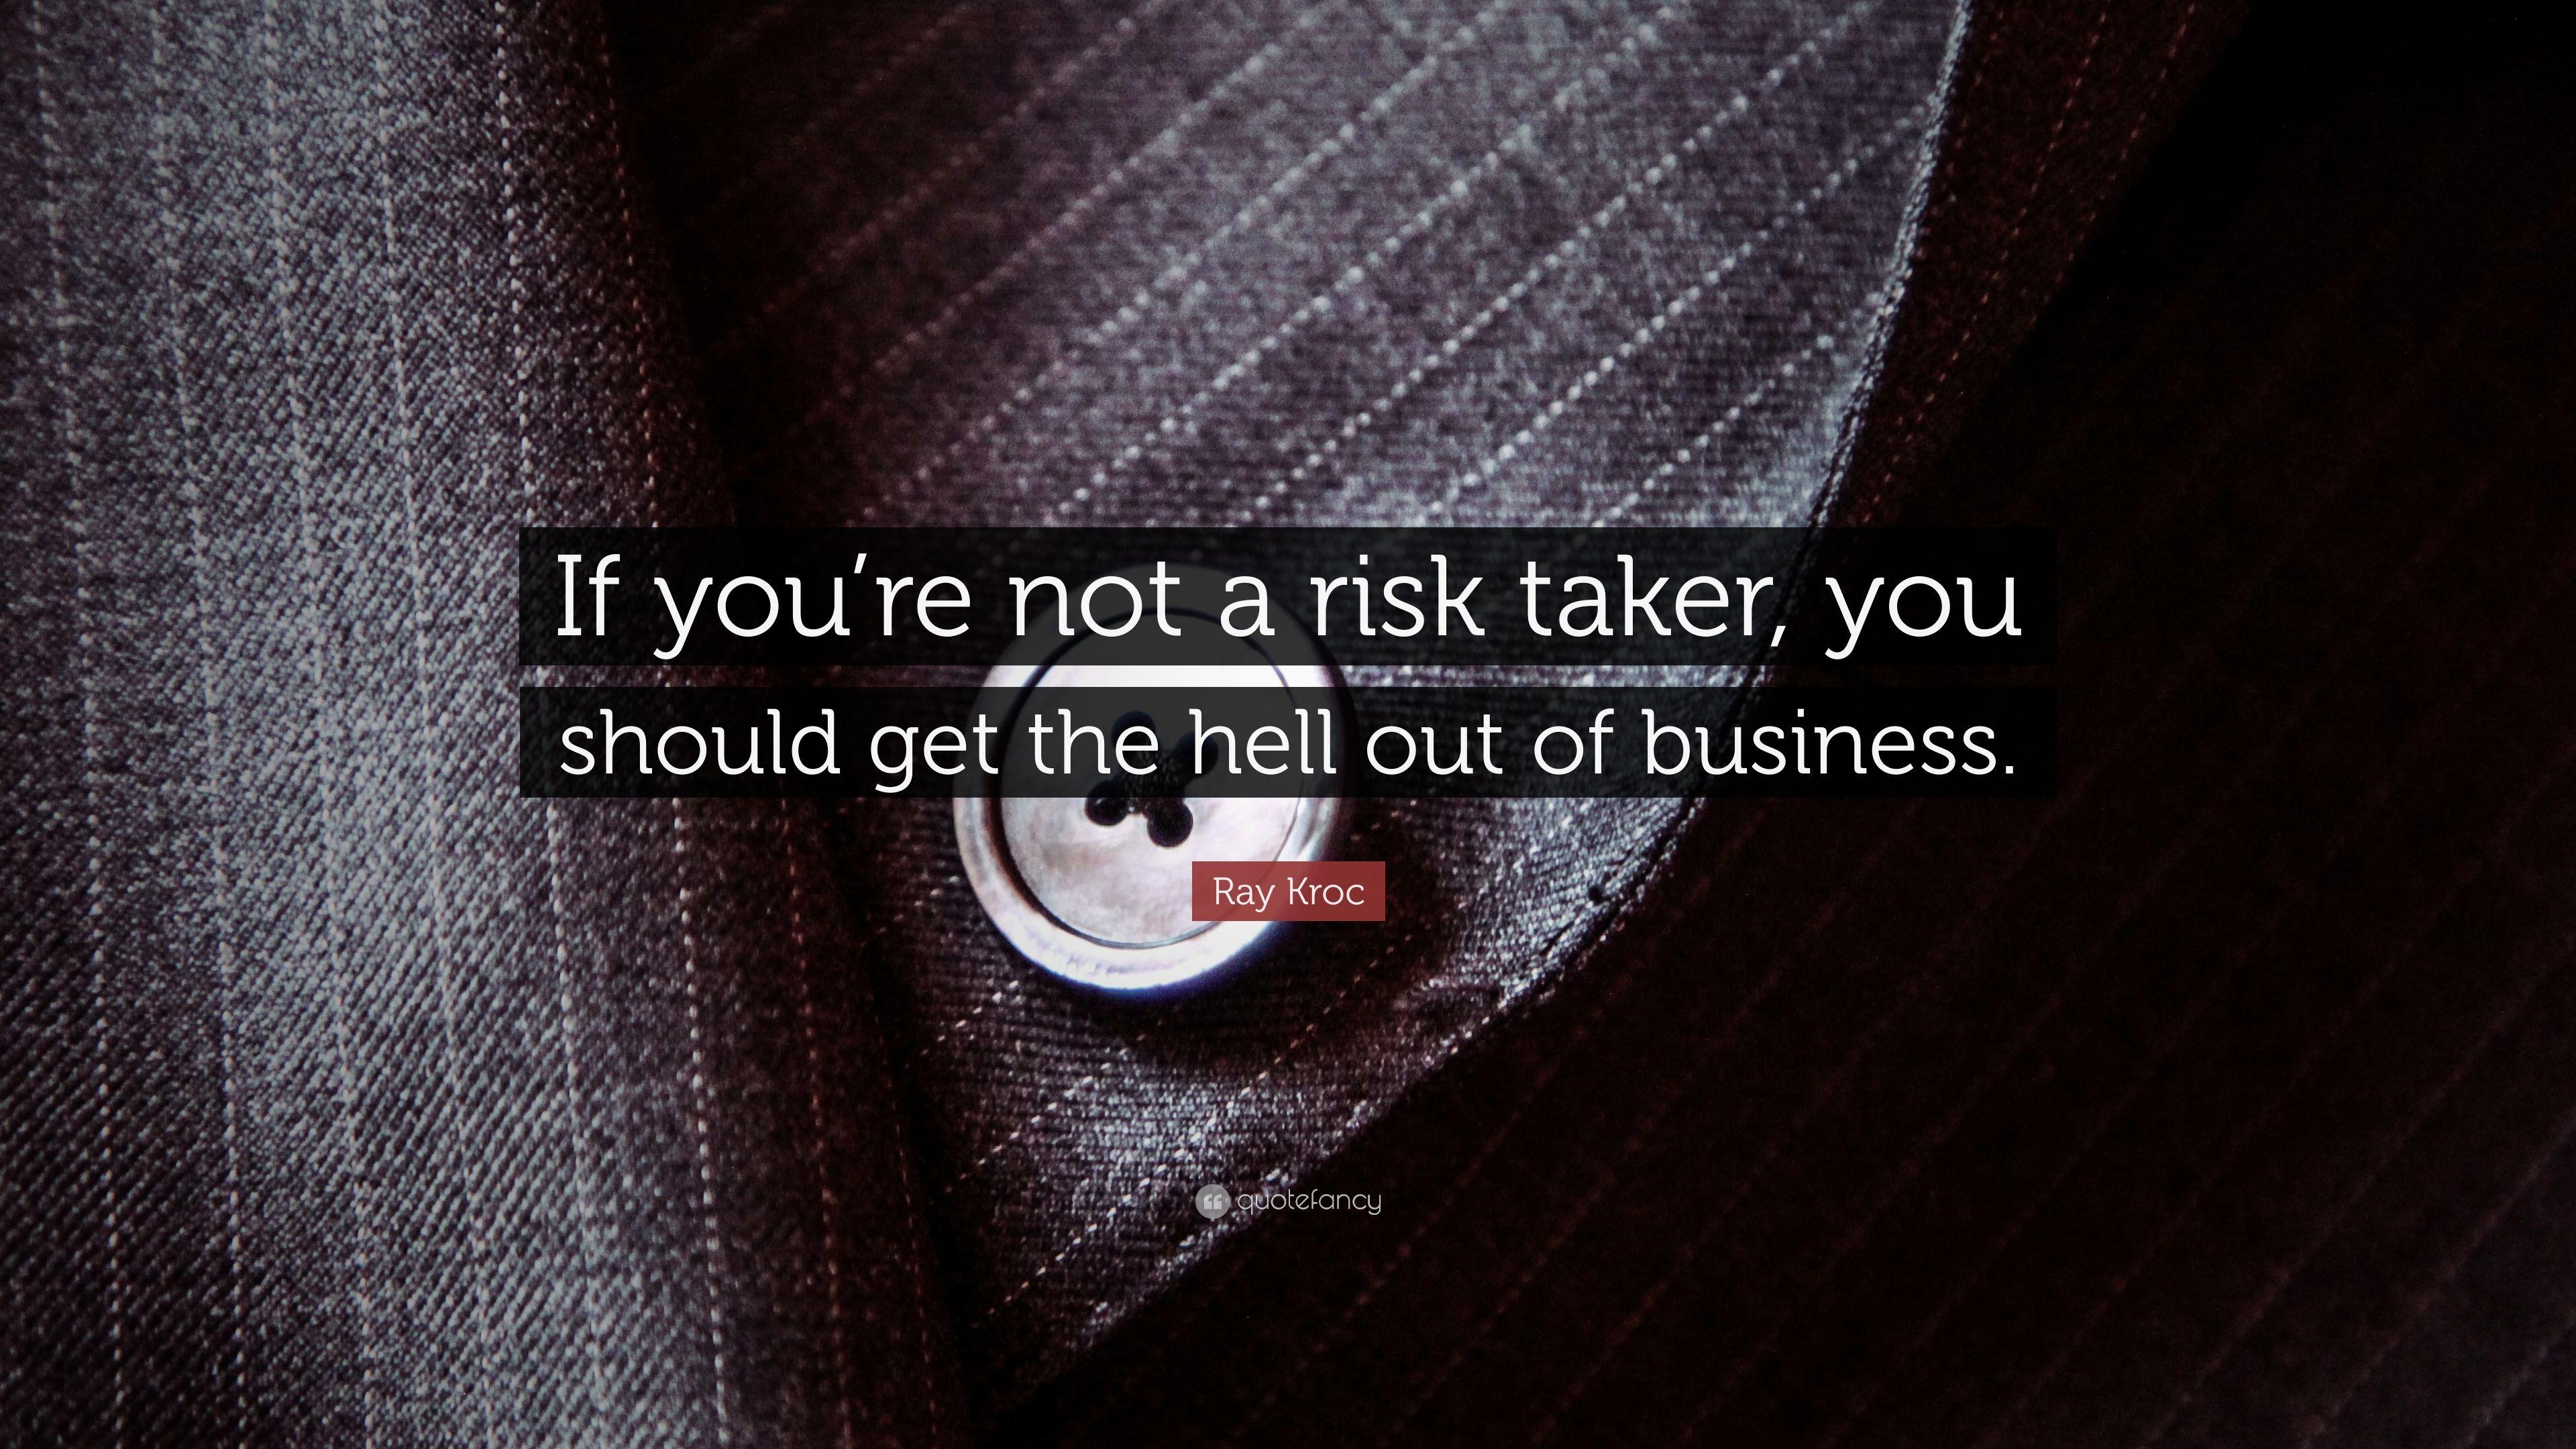 Ray Kroc Quote: “If you're not a risk taker, you should get